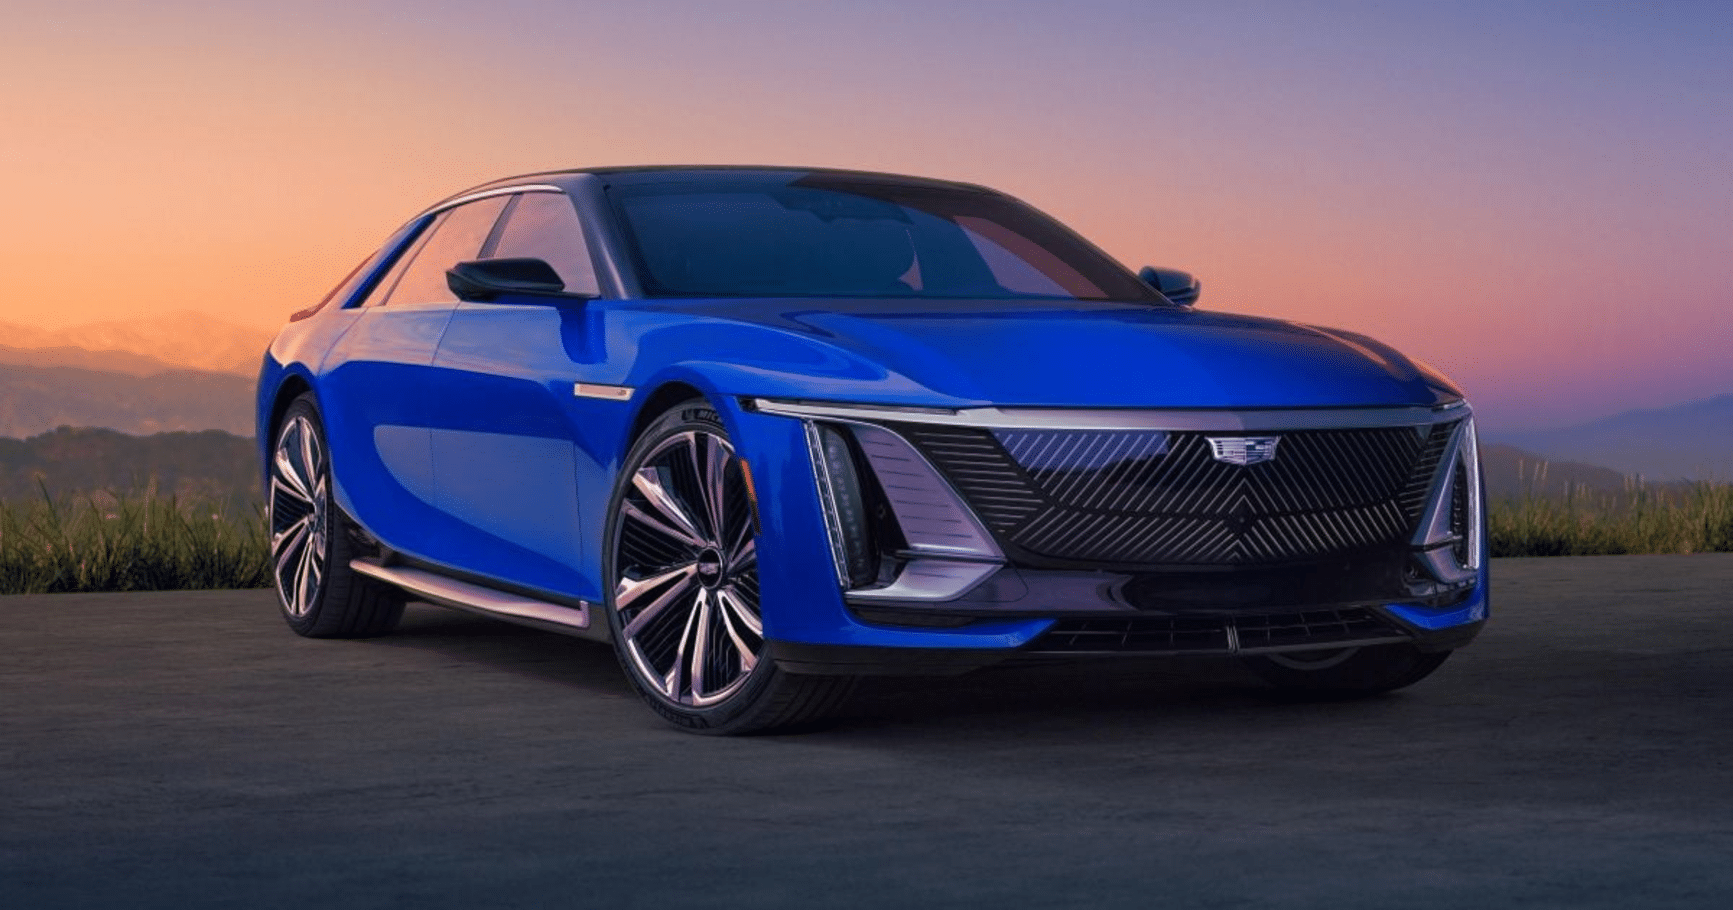 Cadillac’s Electric-Only Lineup by 2030 Questioned as Consumer Demand Dictates